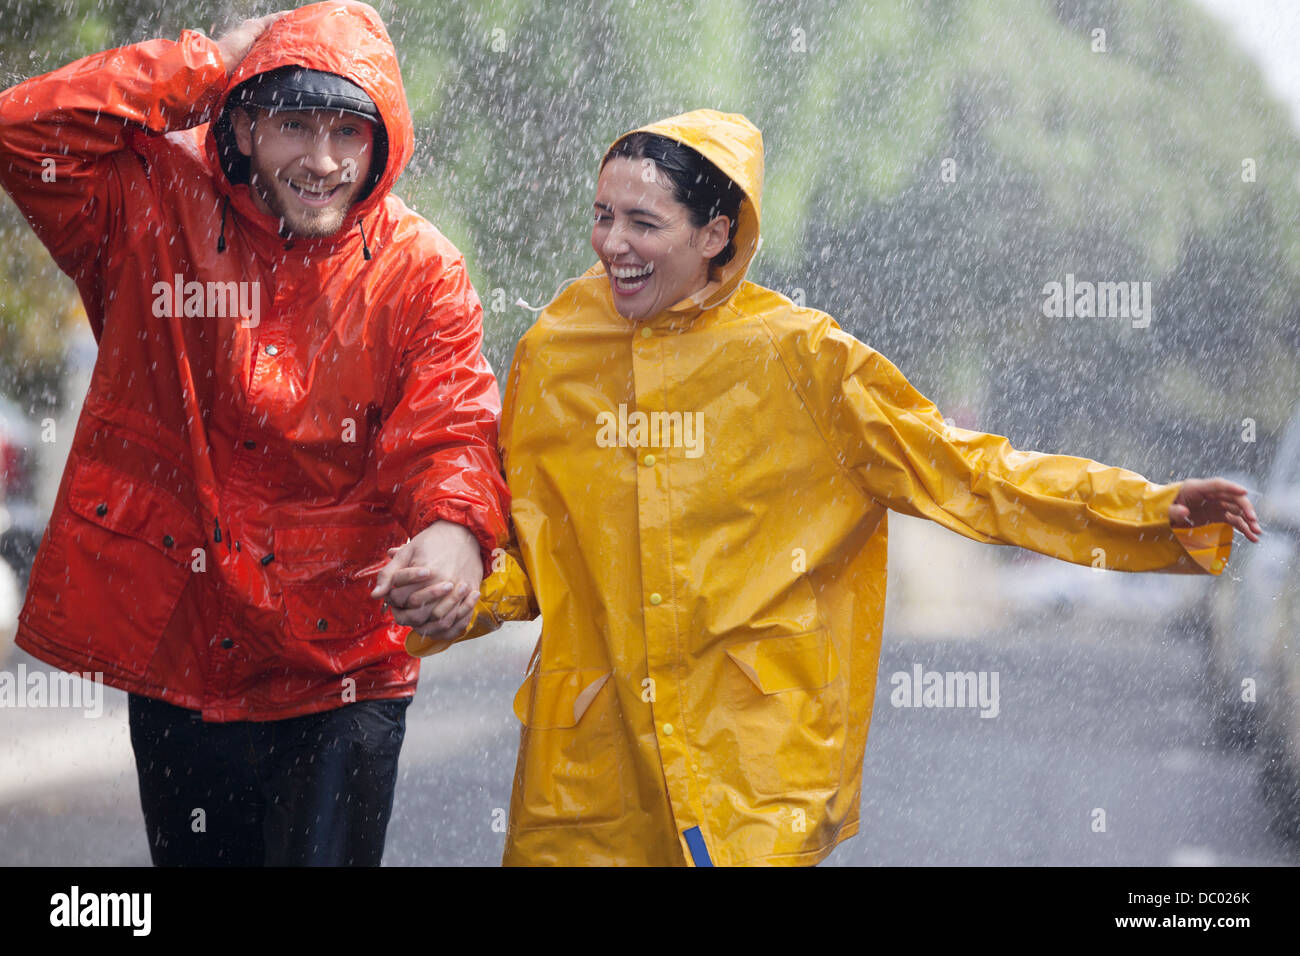 Happy couple holding hands and running in rainy street Stock Photo